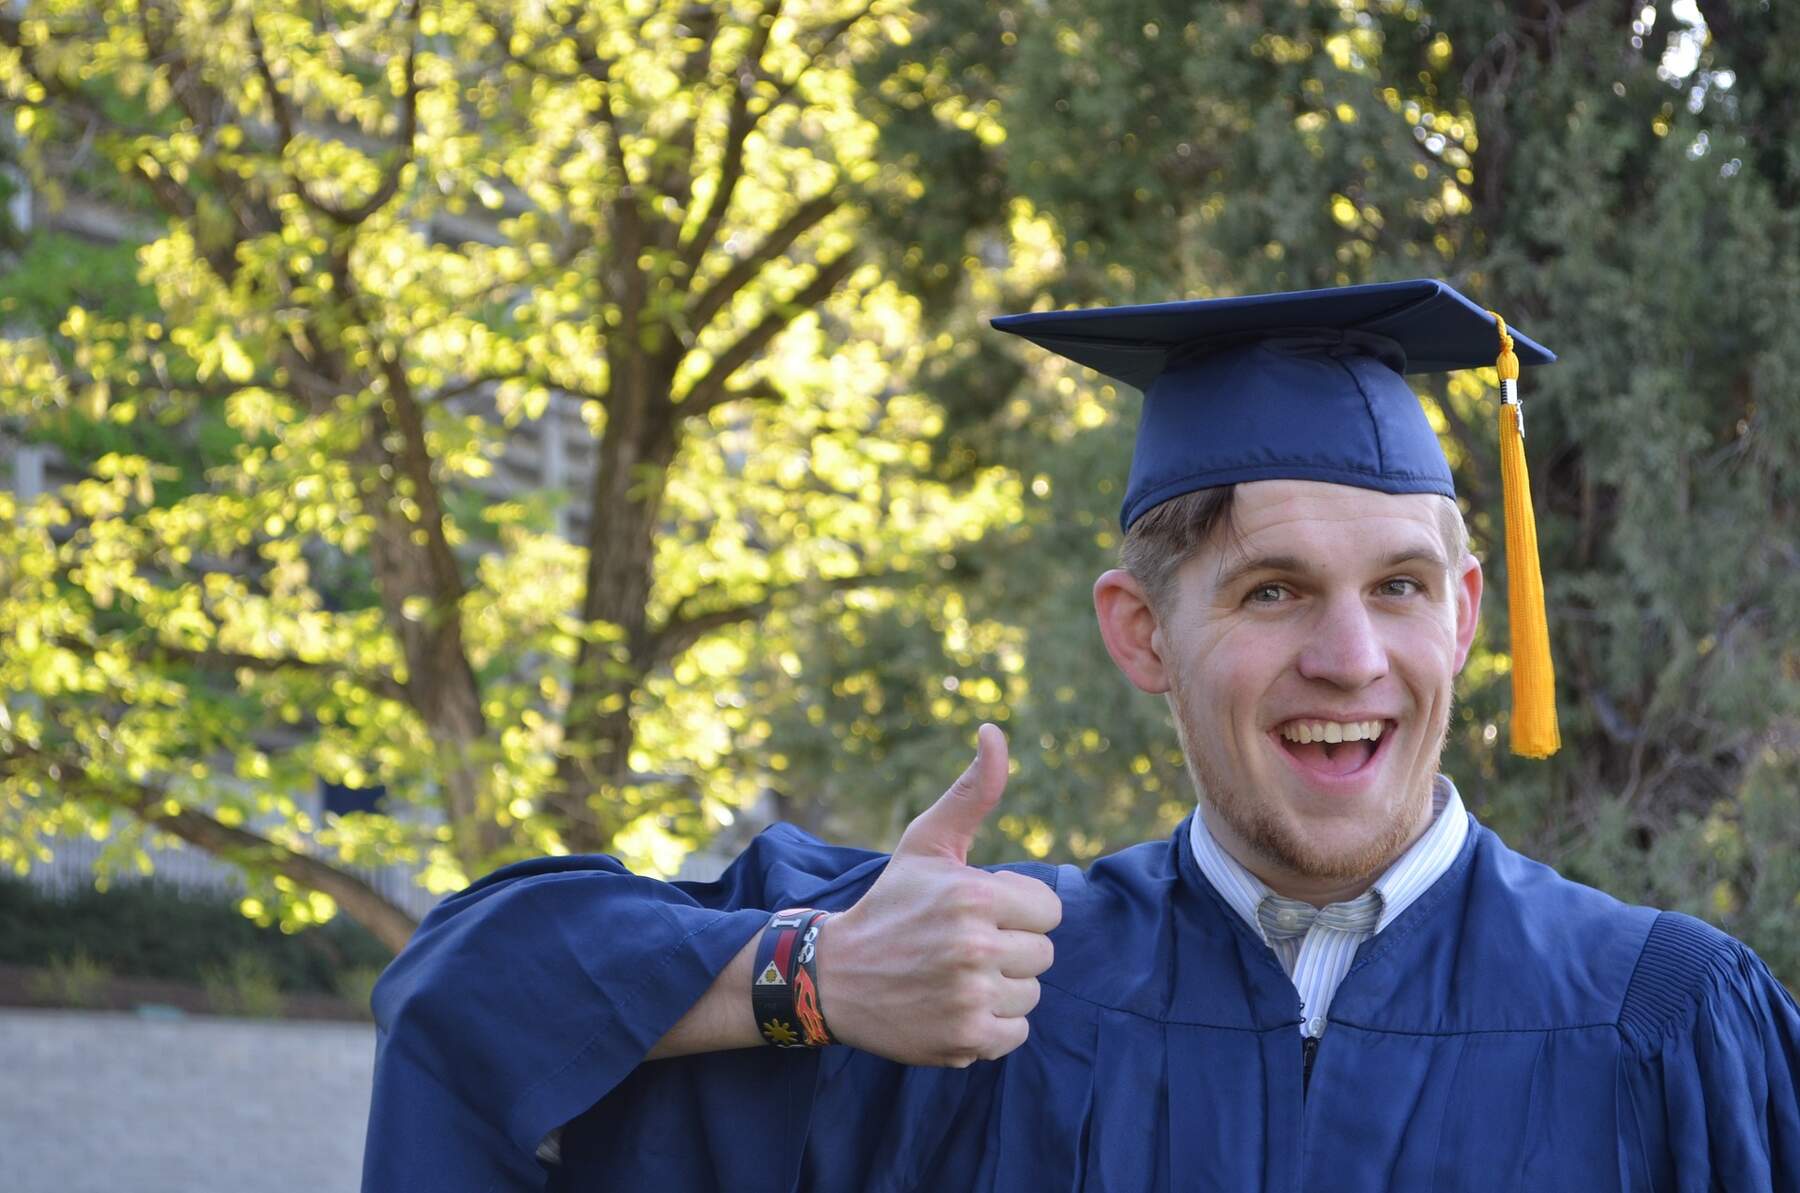 A man in a graduation gown giving a thumbs up